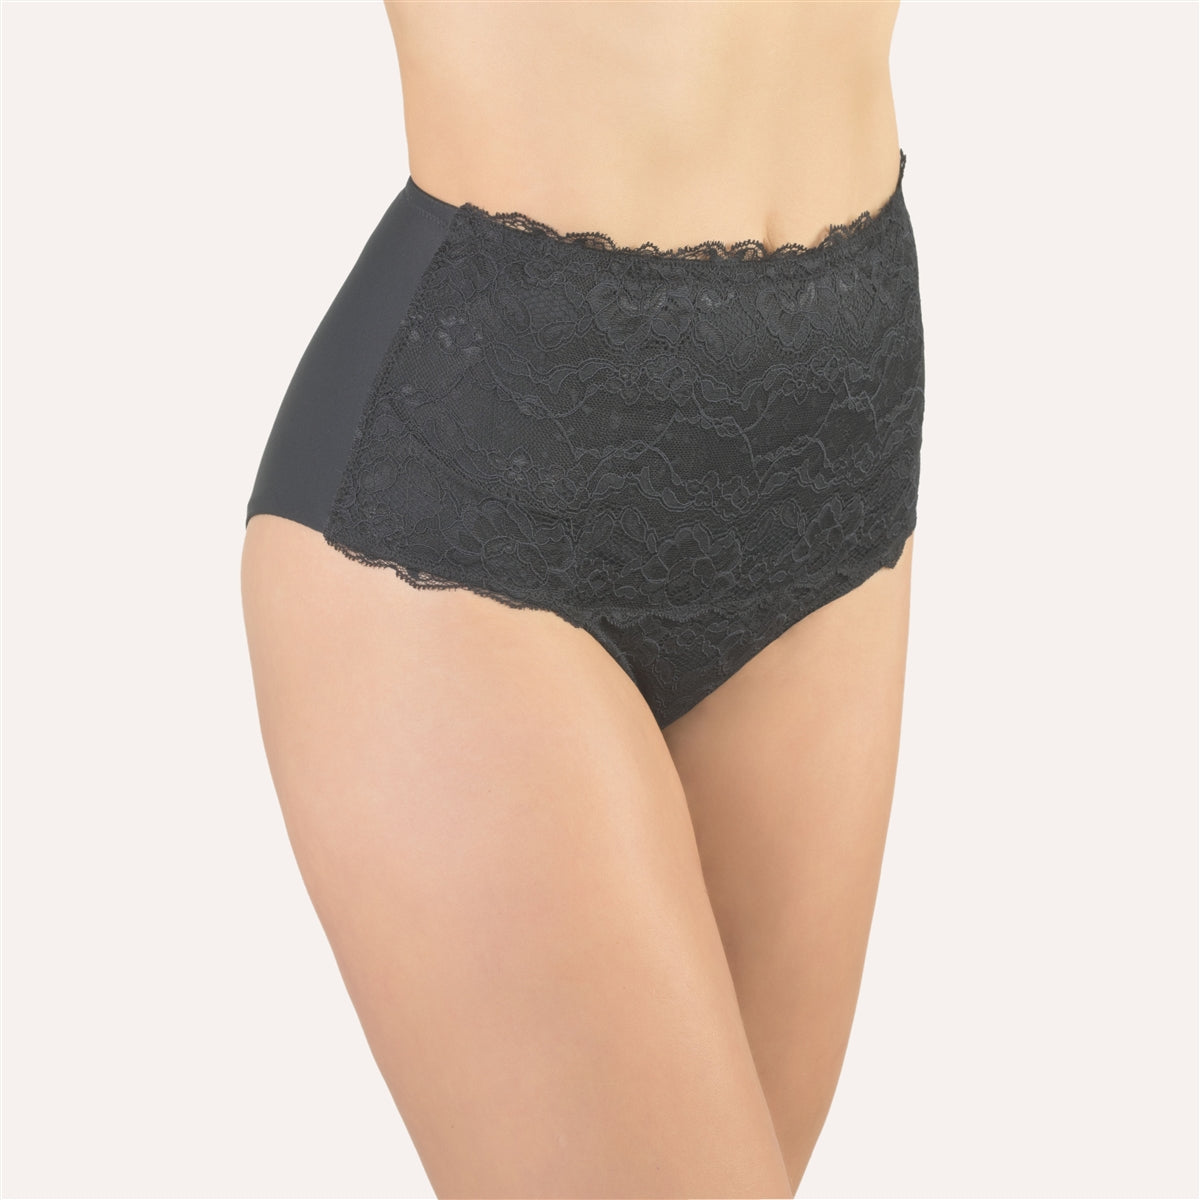 Beautiful black lace high waist brief by designer label, Made in Italy